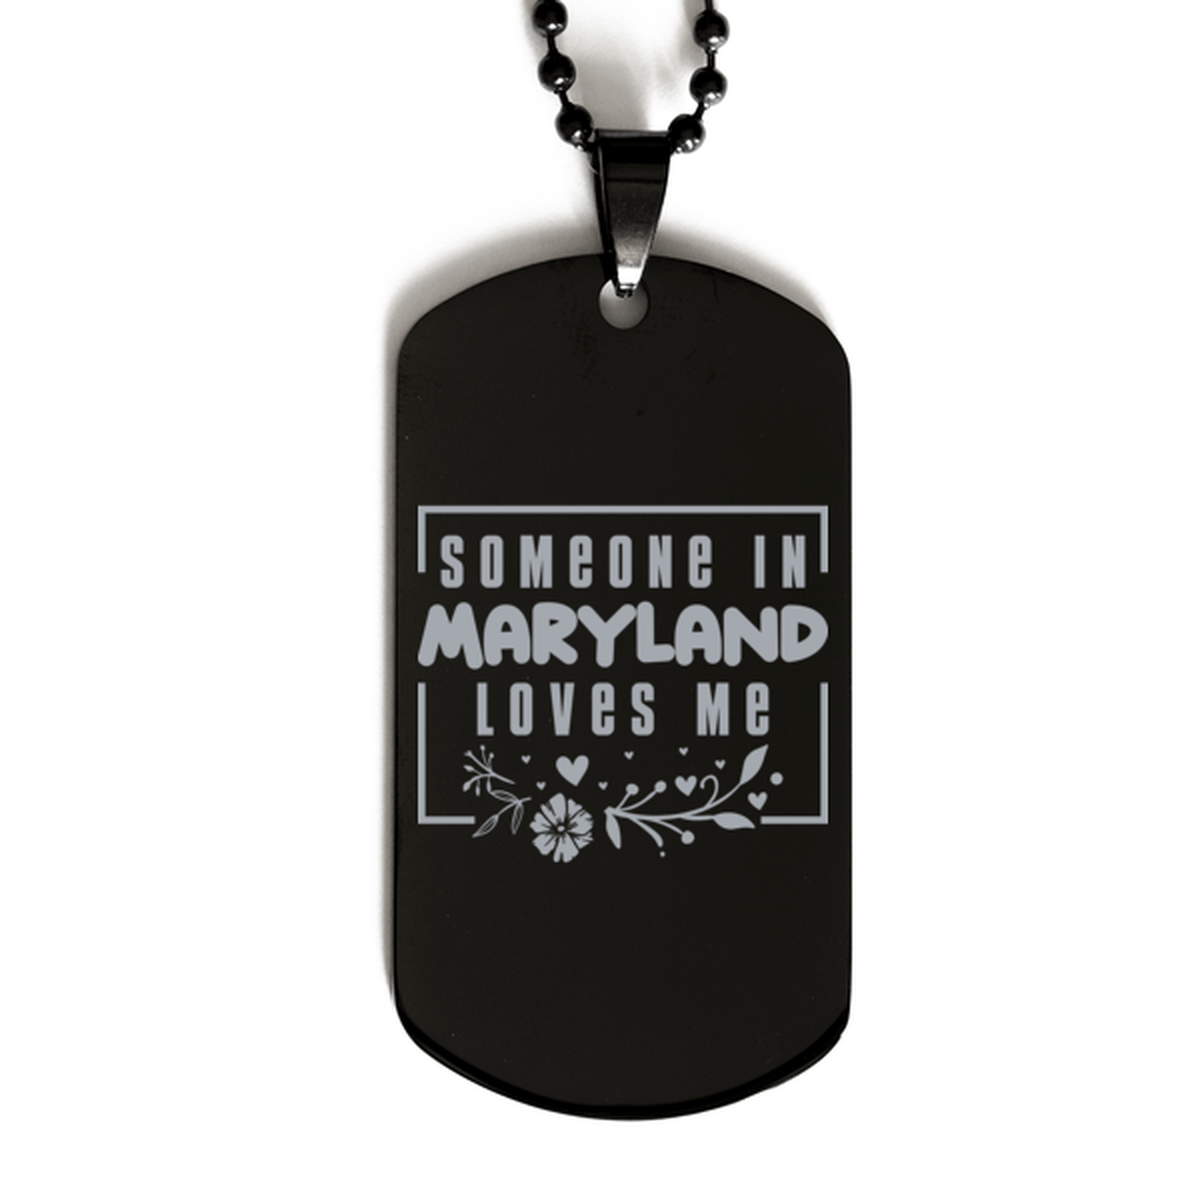 Cute Maryland Black Dog Tag Necklace, Someone in Maryland Loves Me, Best Birthday Gifts from Maryland Friends & Family